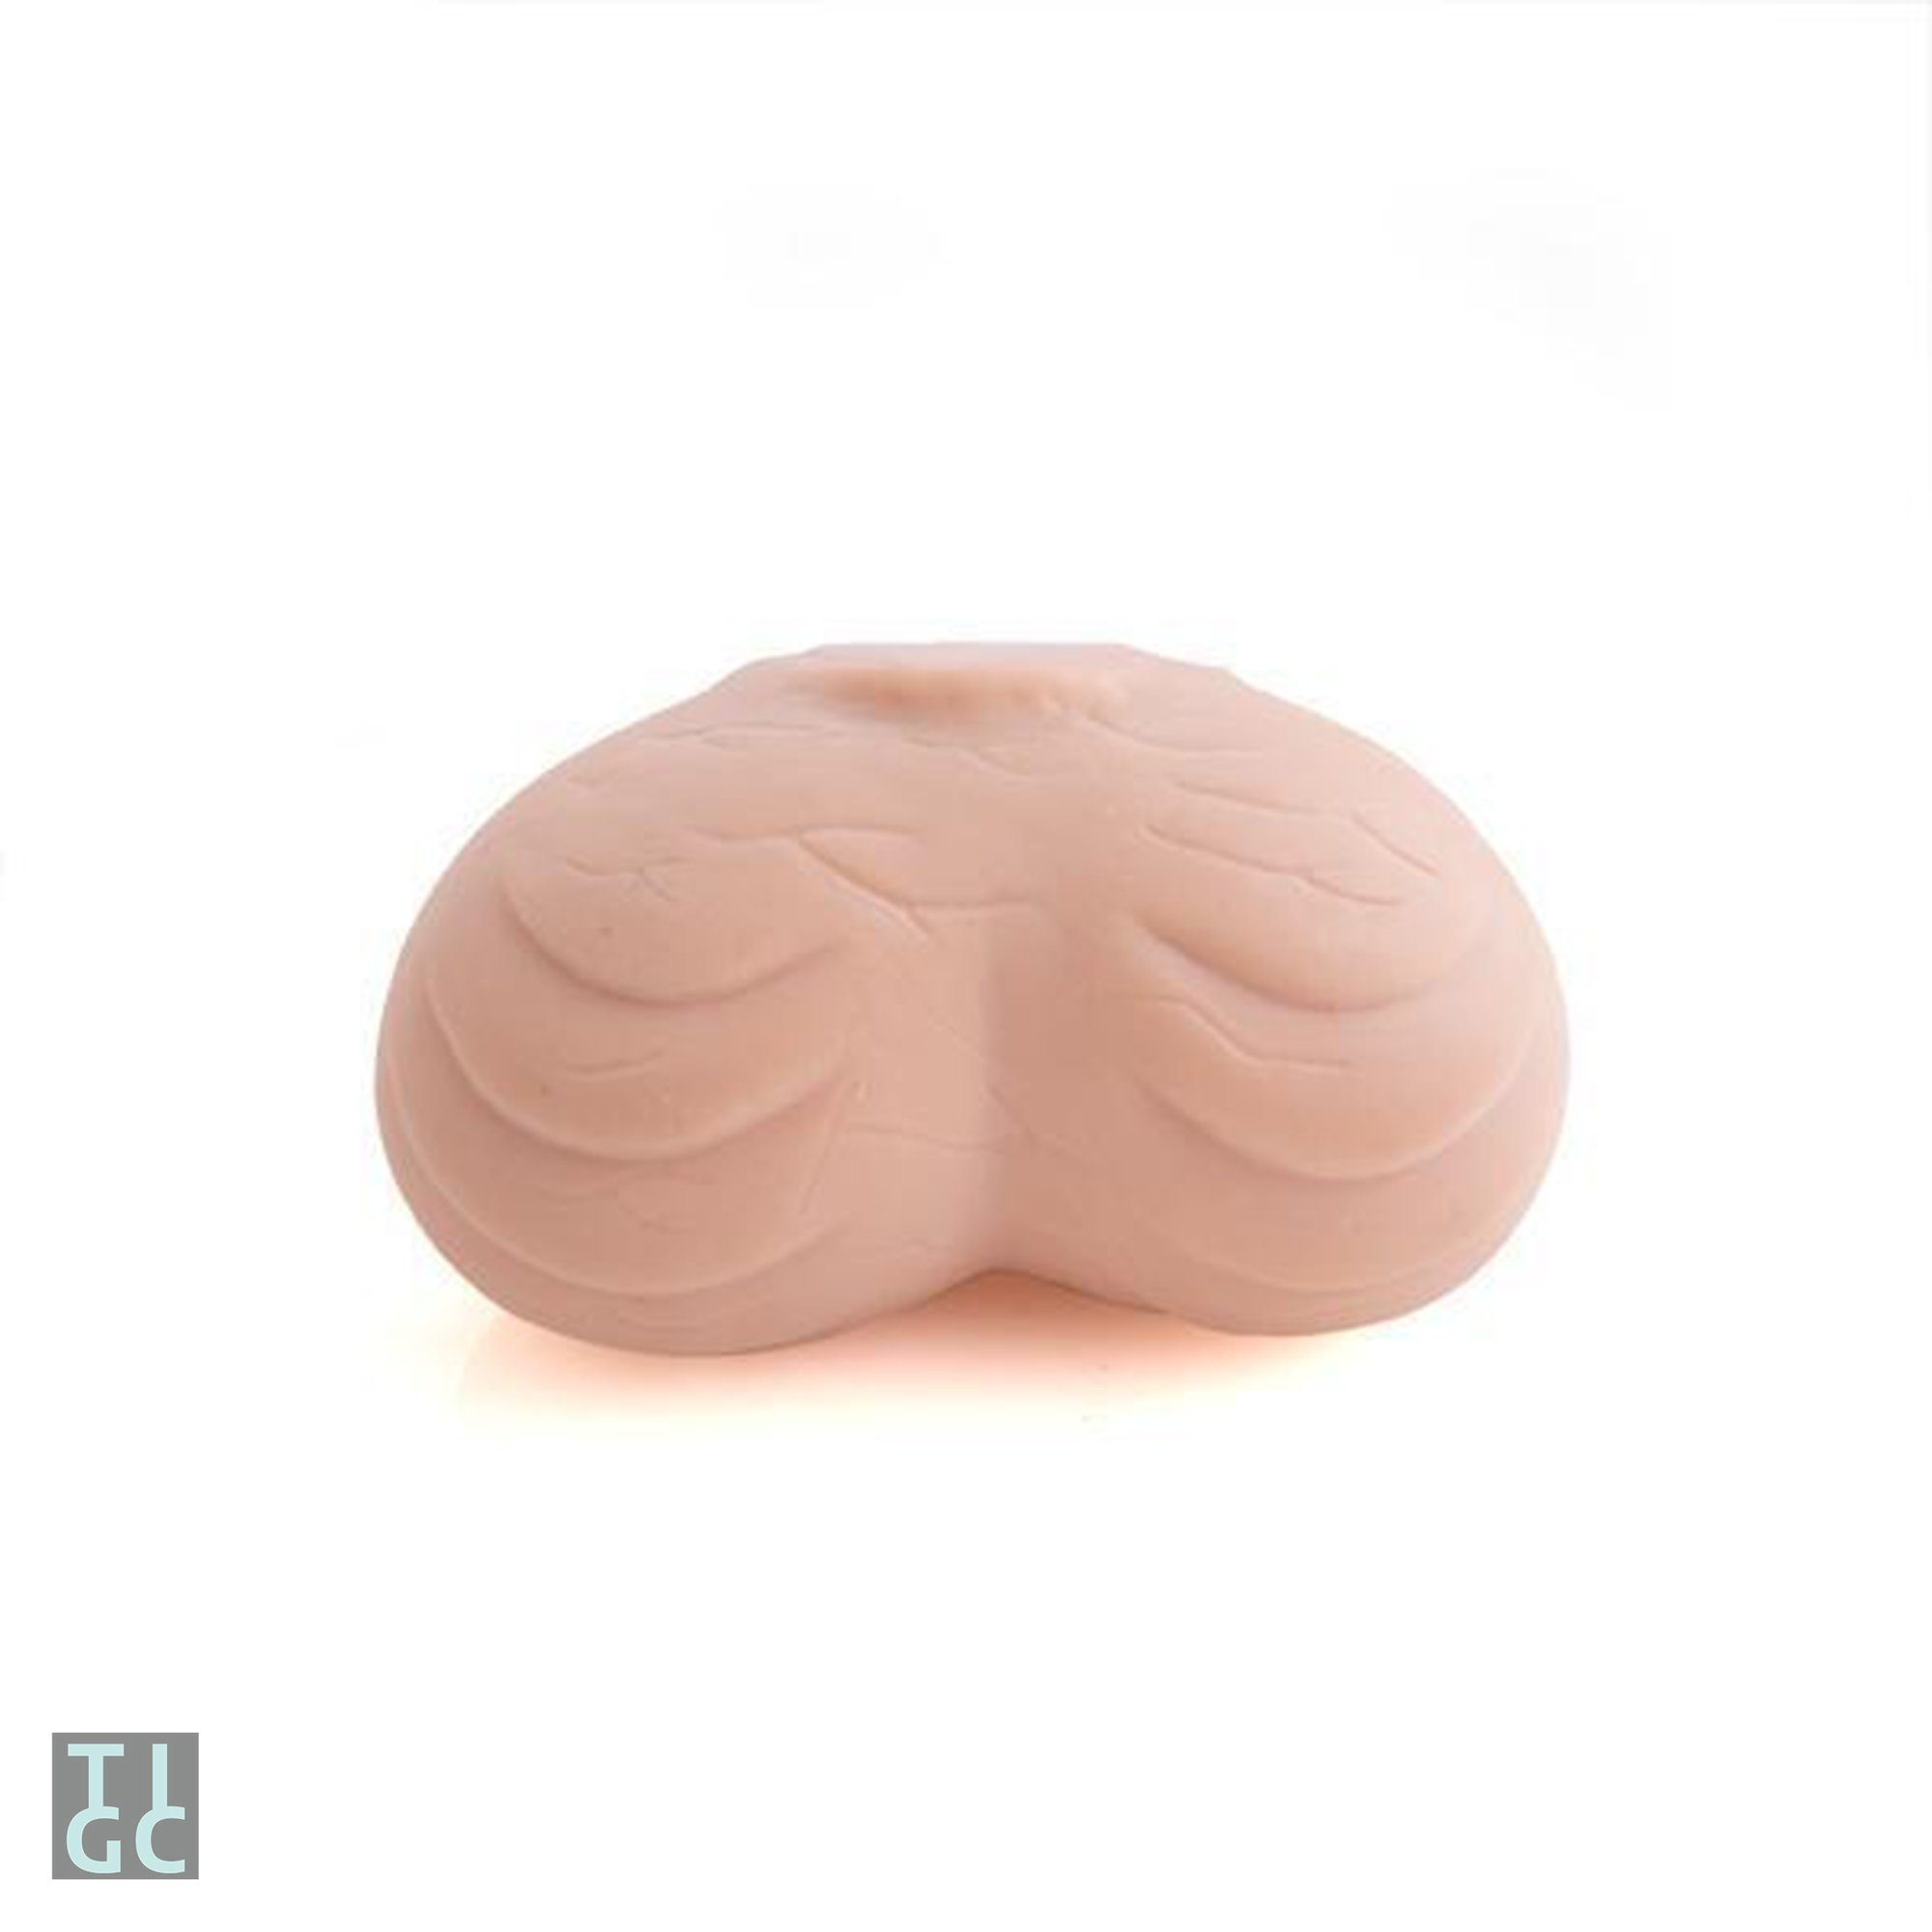 TIGC The Inappropriate Gift Co Stress Balls